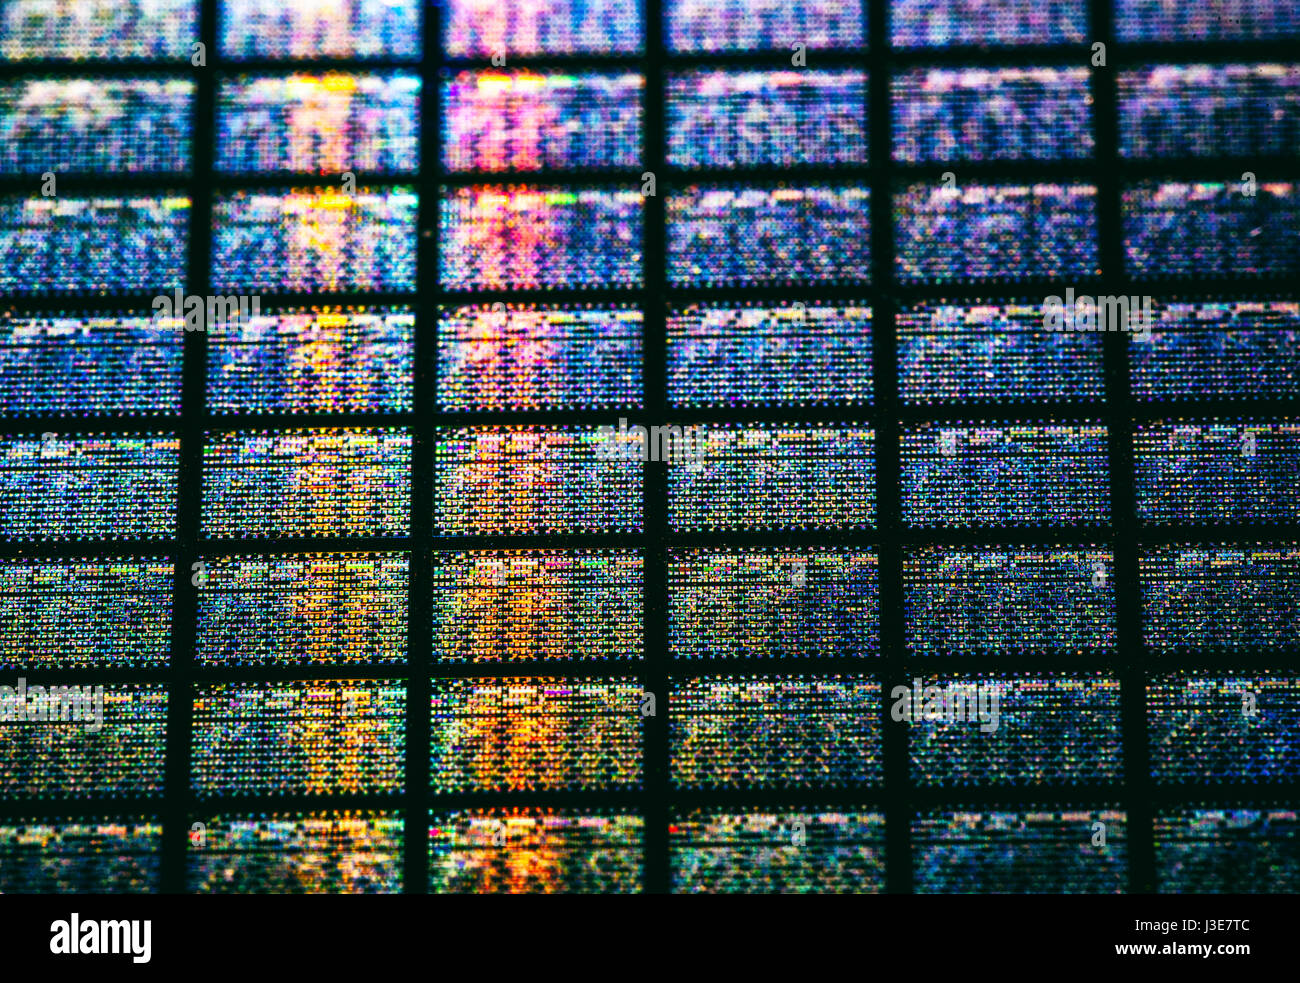 Detail of Silicon Wafer Containing Microchips Stock Photo